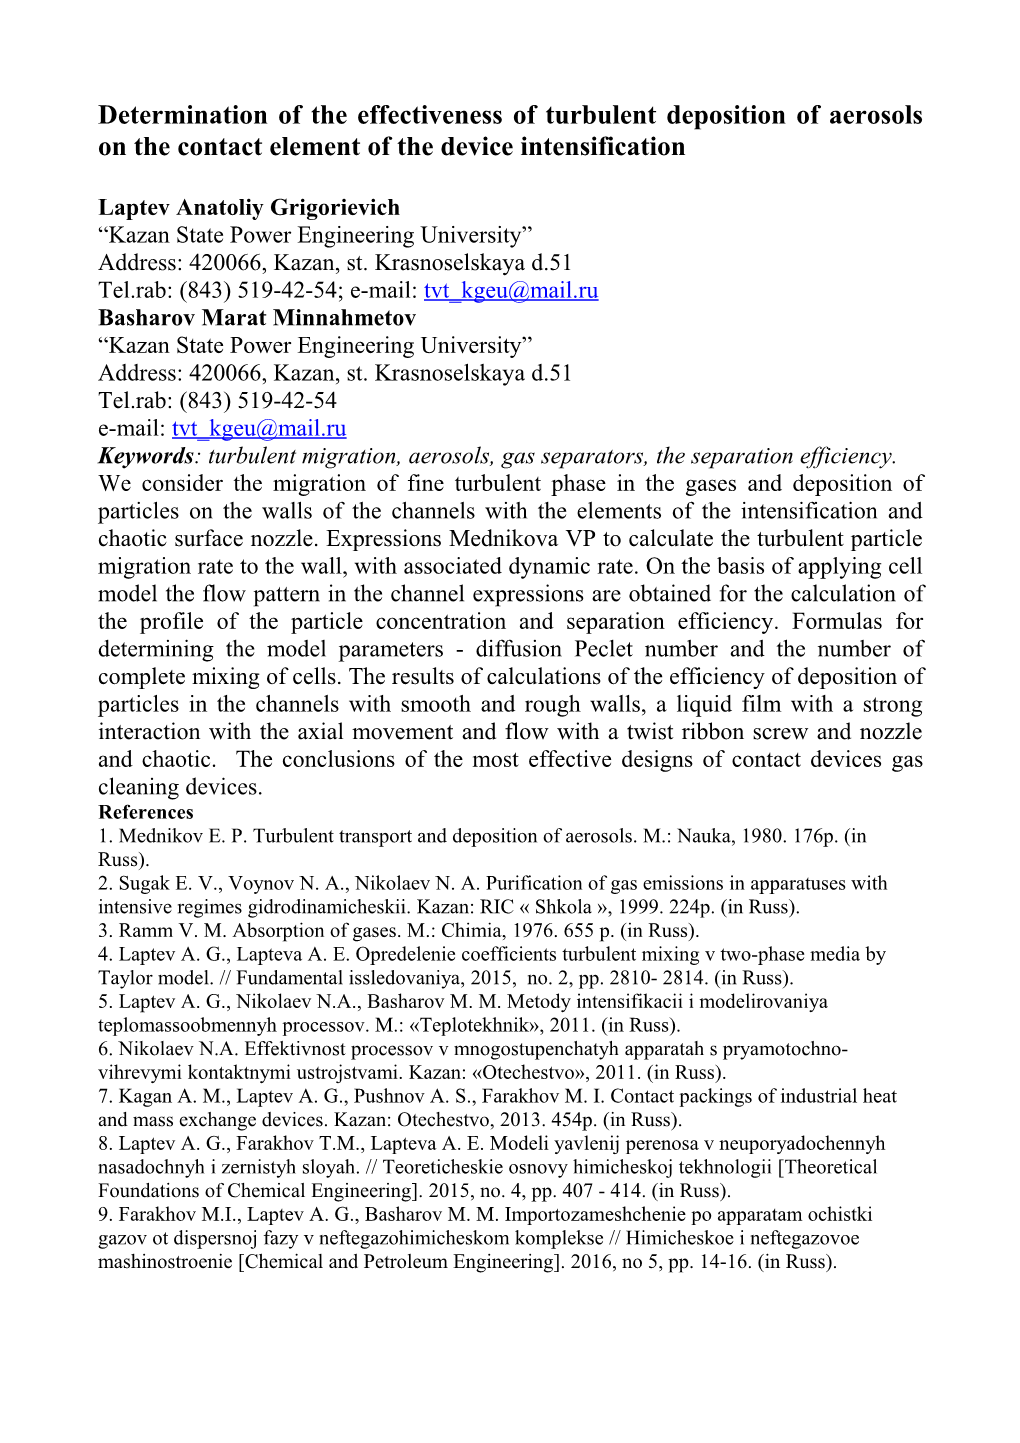 Determination of the Effectiveness of Turbulent Deposition of Aerosols on the Contact